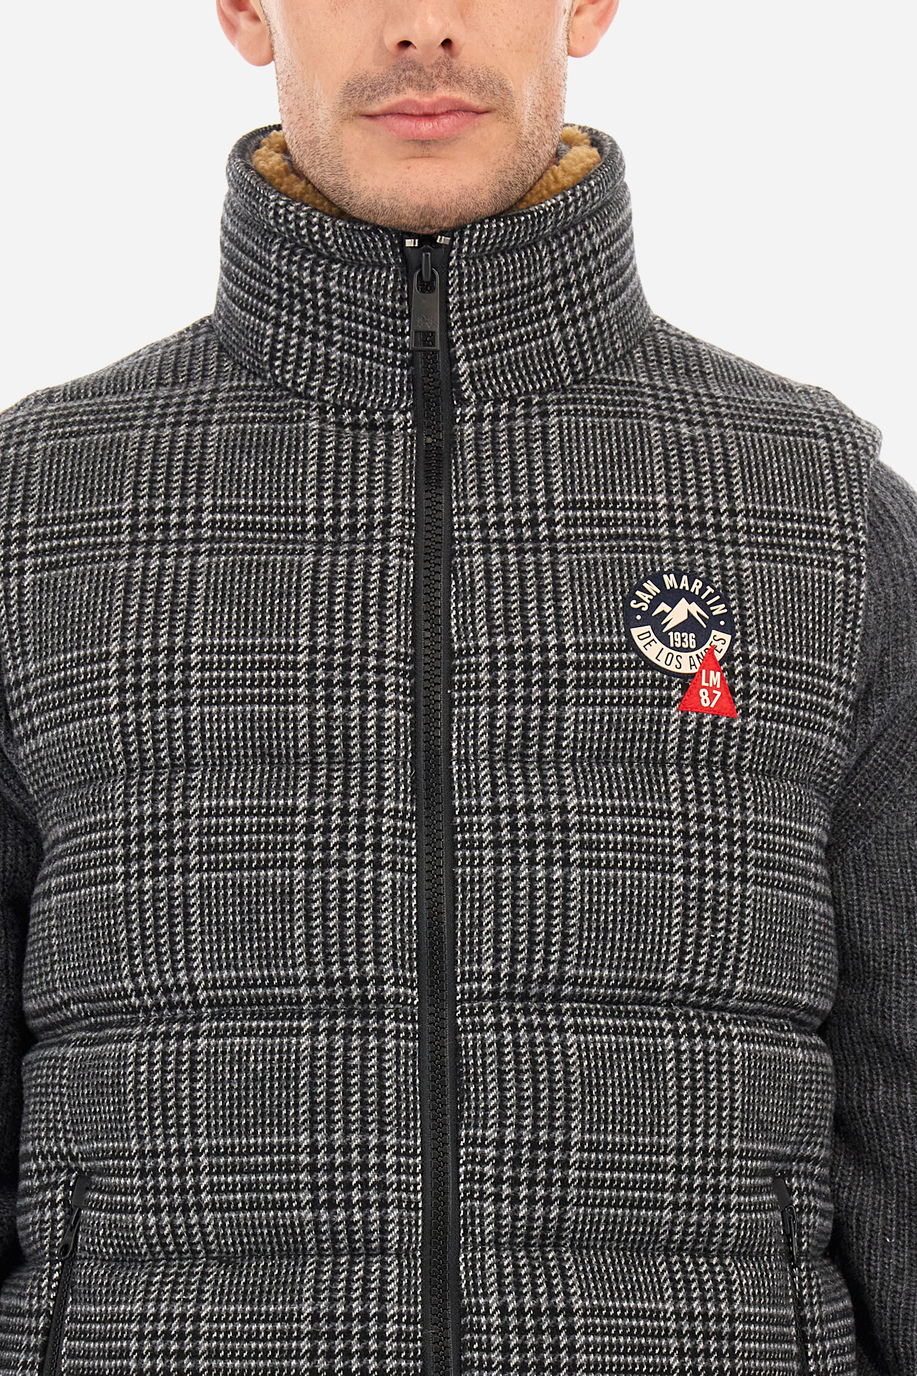 Man gilet in regular fit - Wick - Outerwear and Jackets | La Martina - Official Online Shop